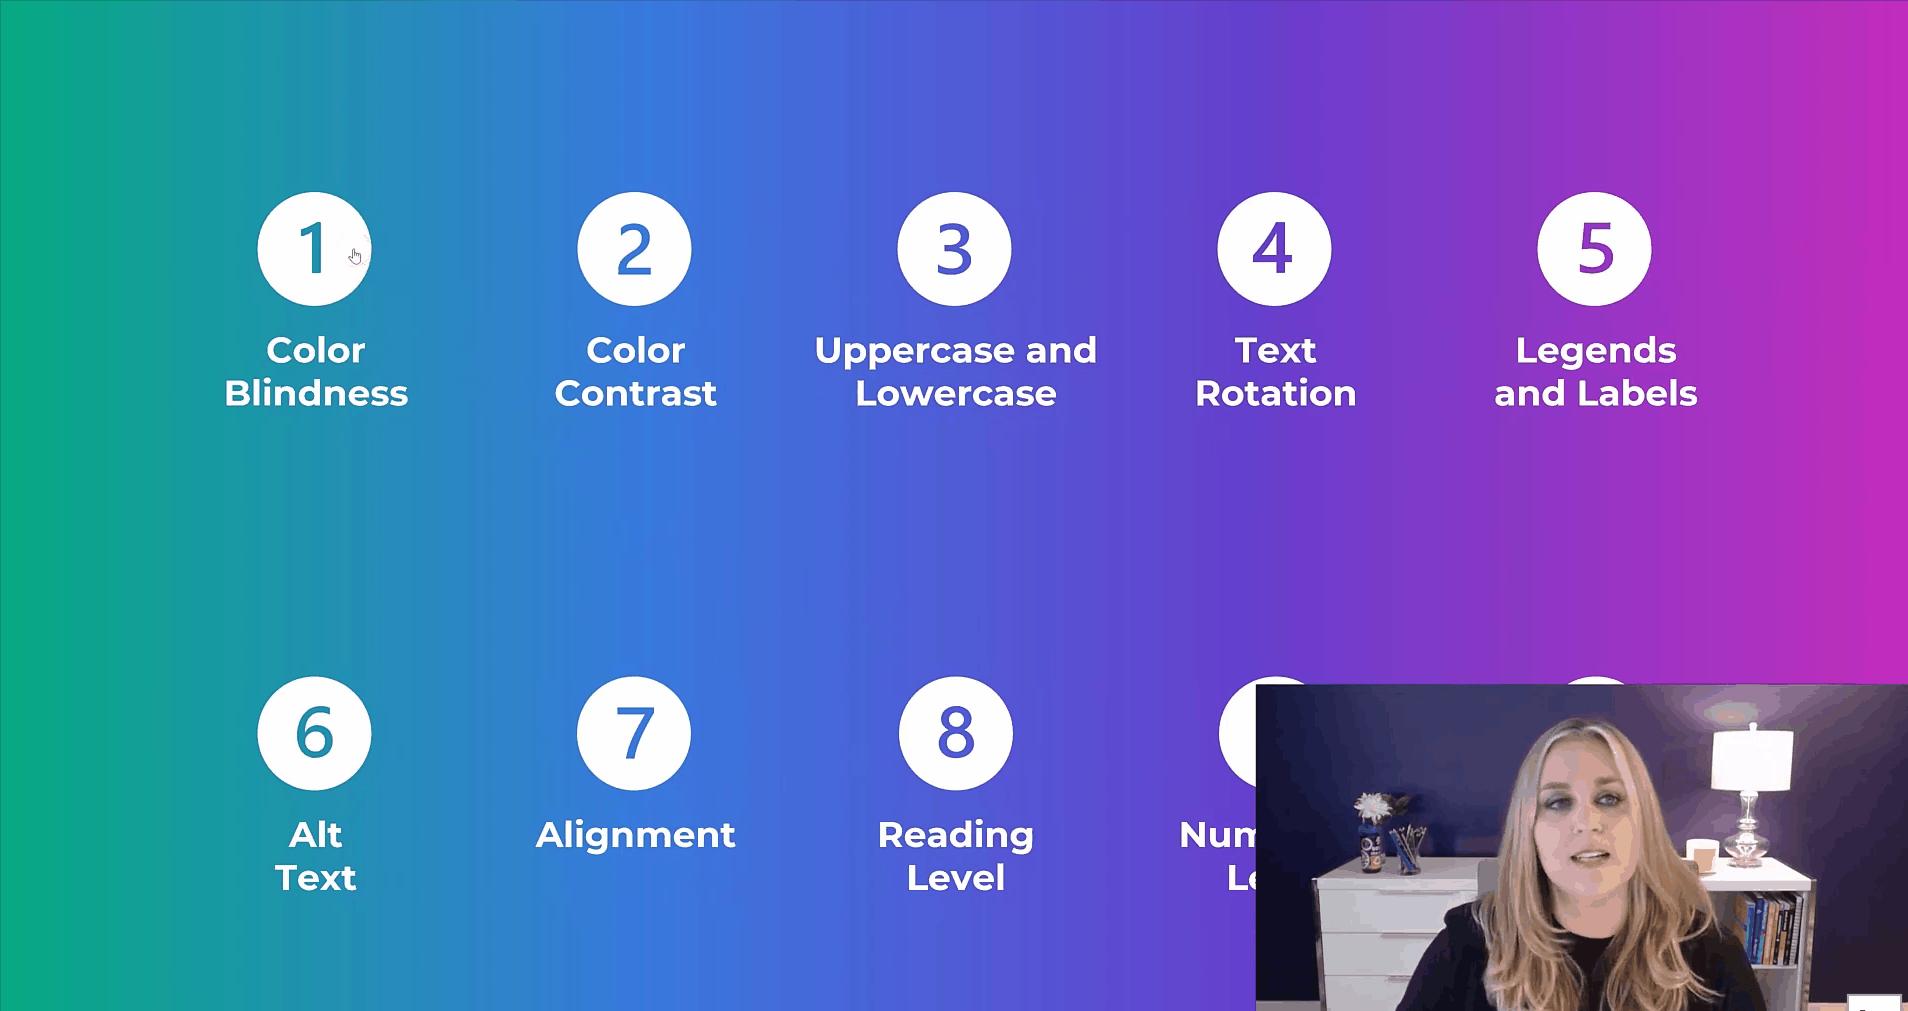 If attendees want to learn about Color Blindness, for instance, then I would click on the Color Blindness section of this slide. The links fast-forward us to that segment of slides.